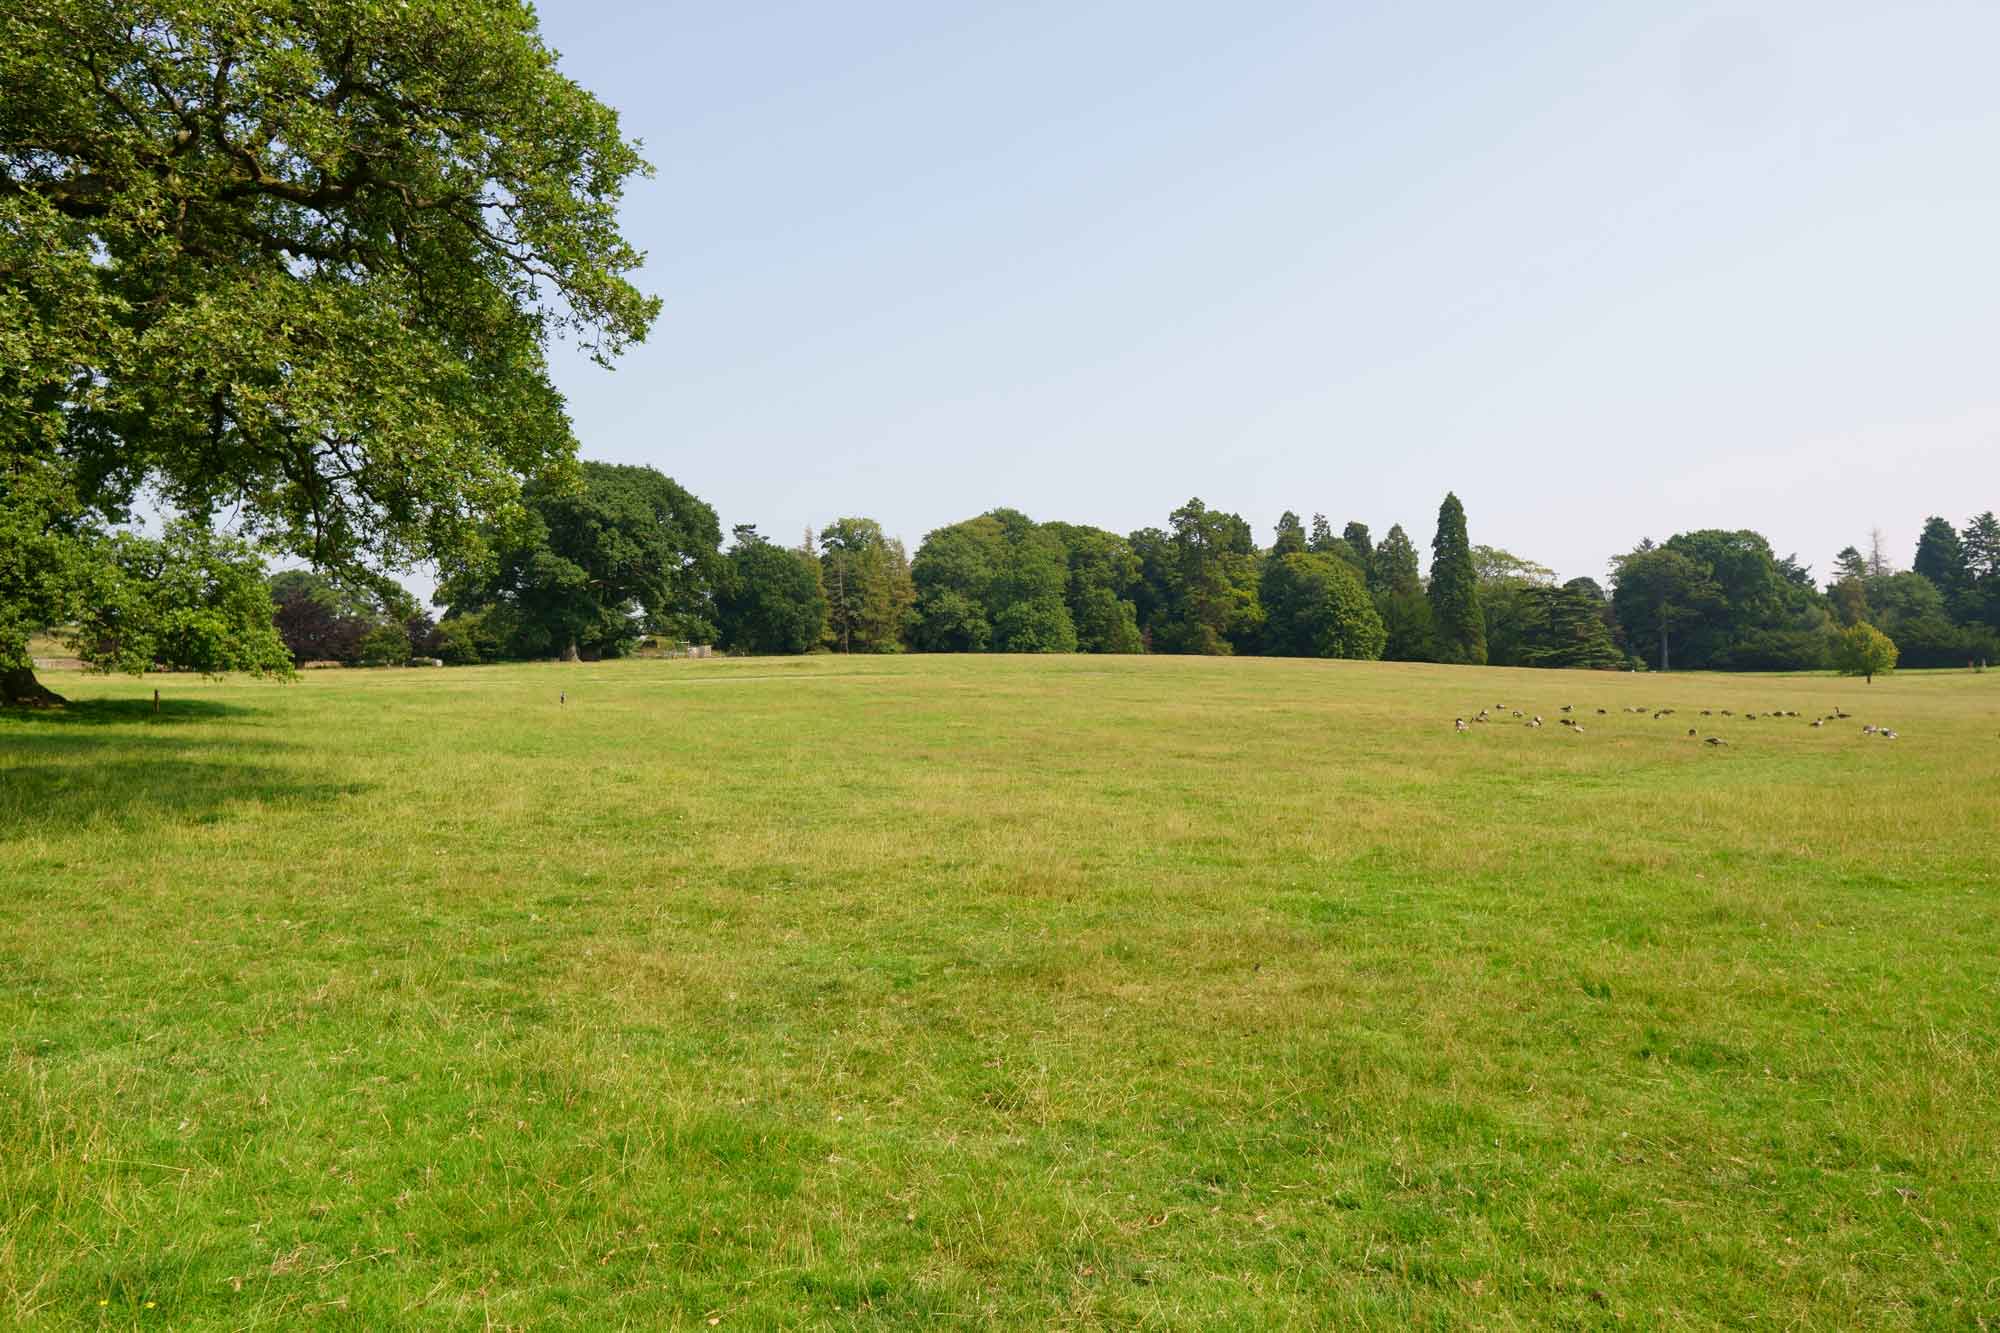 The grounds of Ripley Castle form a natural amphitheatre 